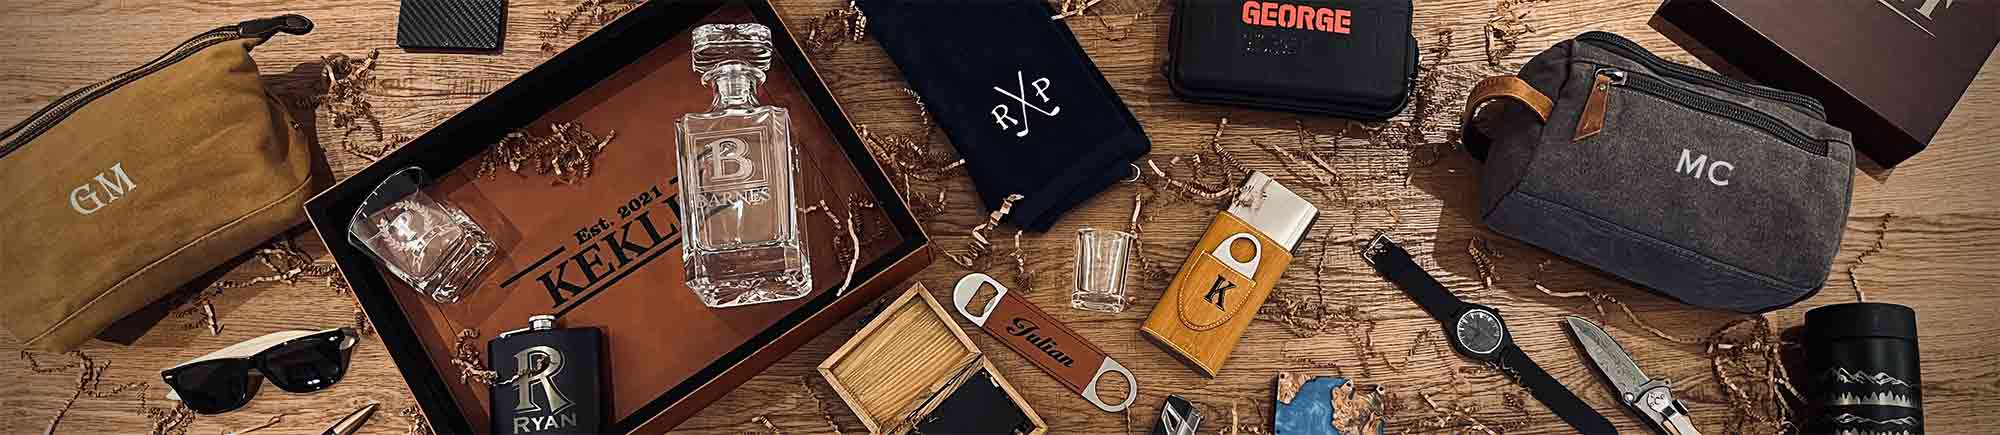 Personalized Gifts For Him